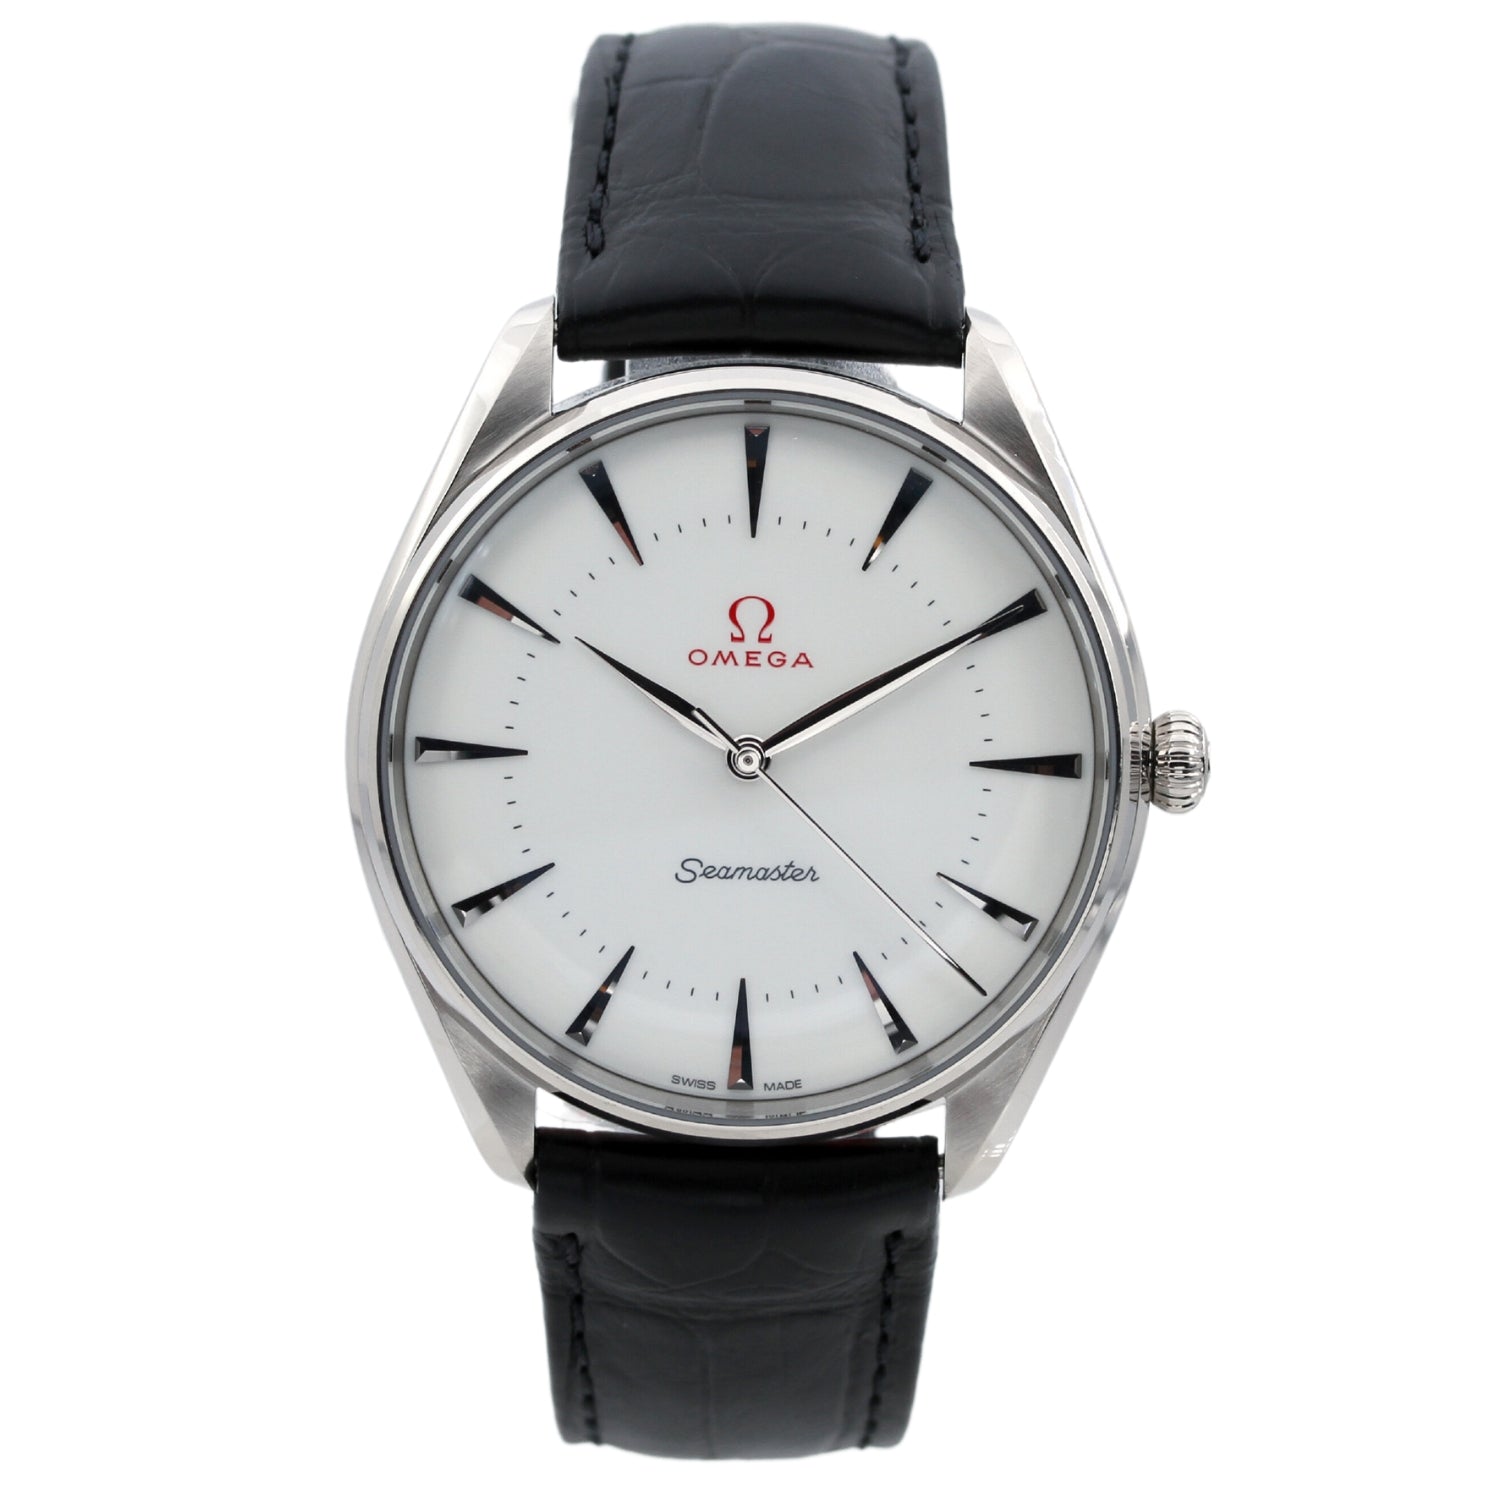 Omega Seamaster 39.5mm Olympic Games Gold, white gold, Ref. 522.53.40.20.04.002, red Logo, B+P - LUXUHRIA